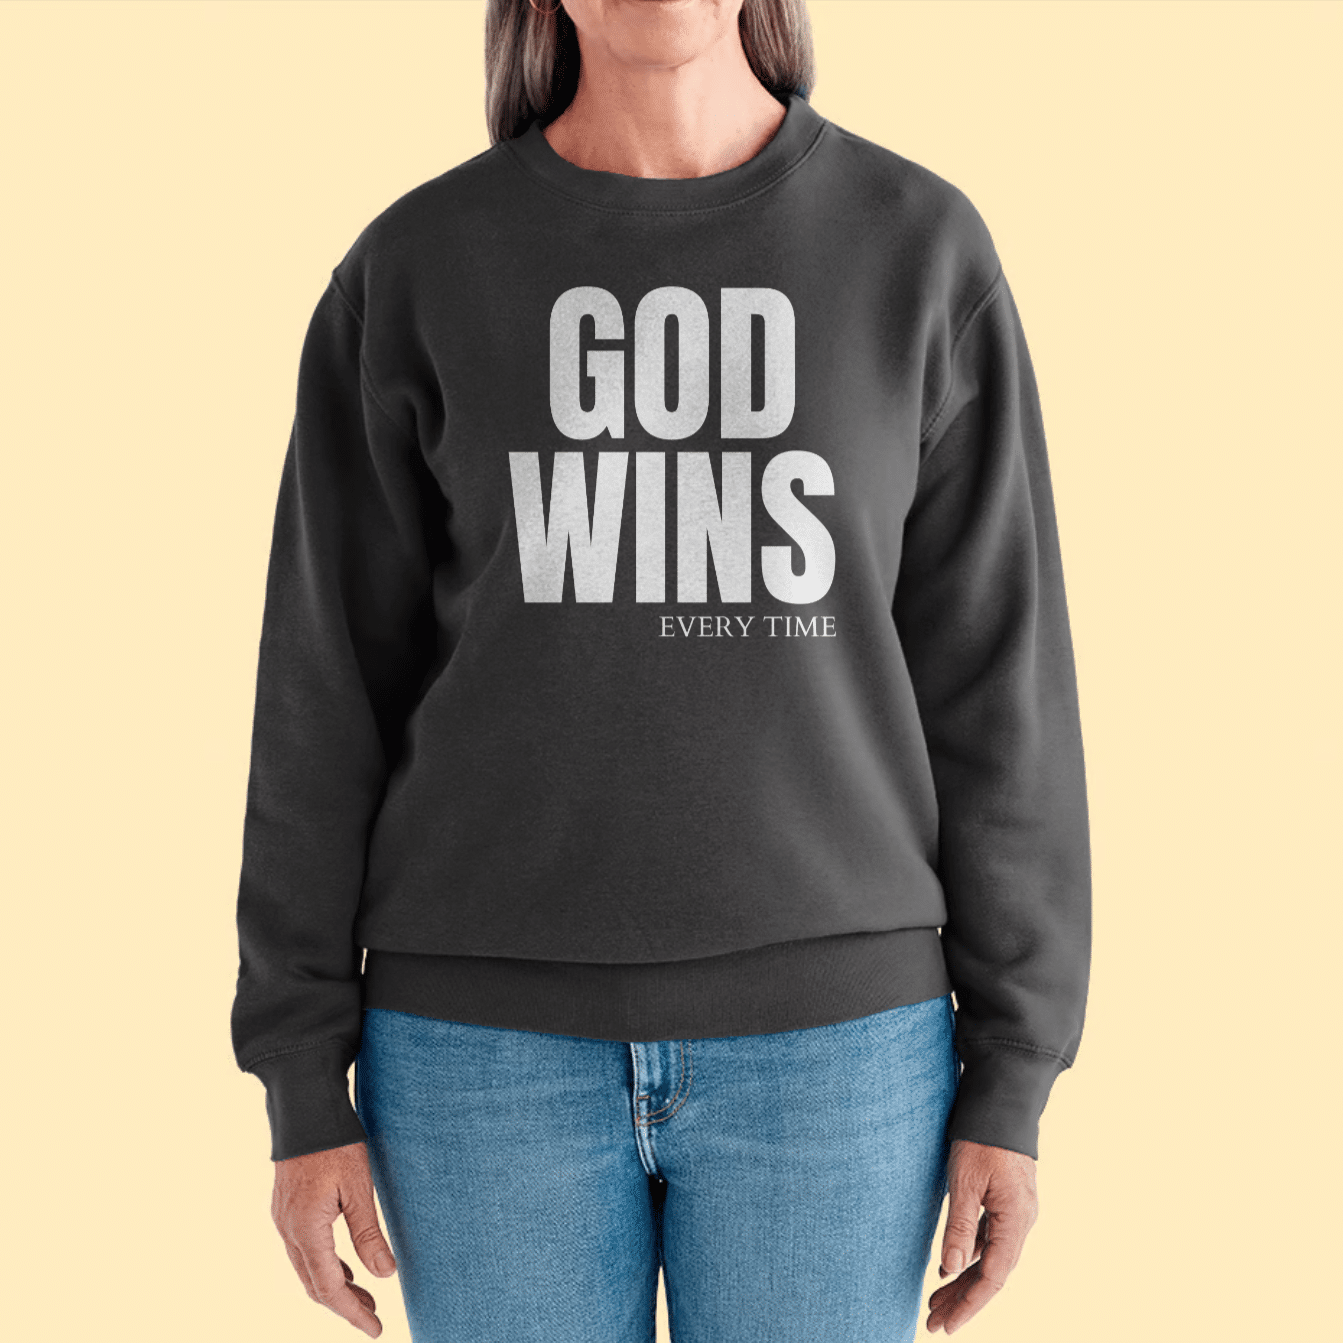 God wins every time crewneck available at Little Big Things Christian Book Store